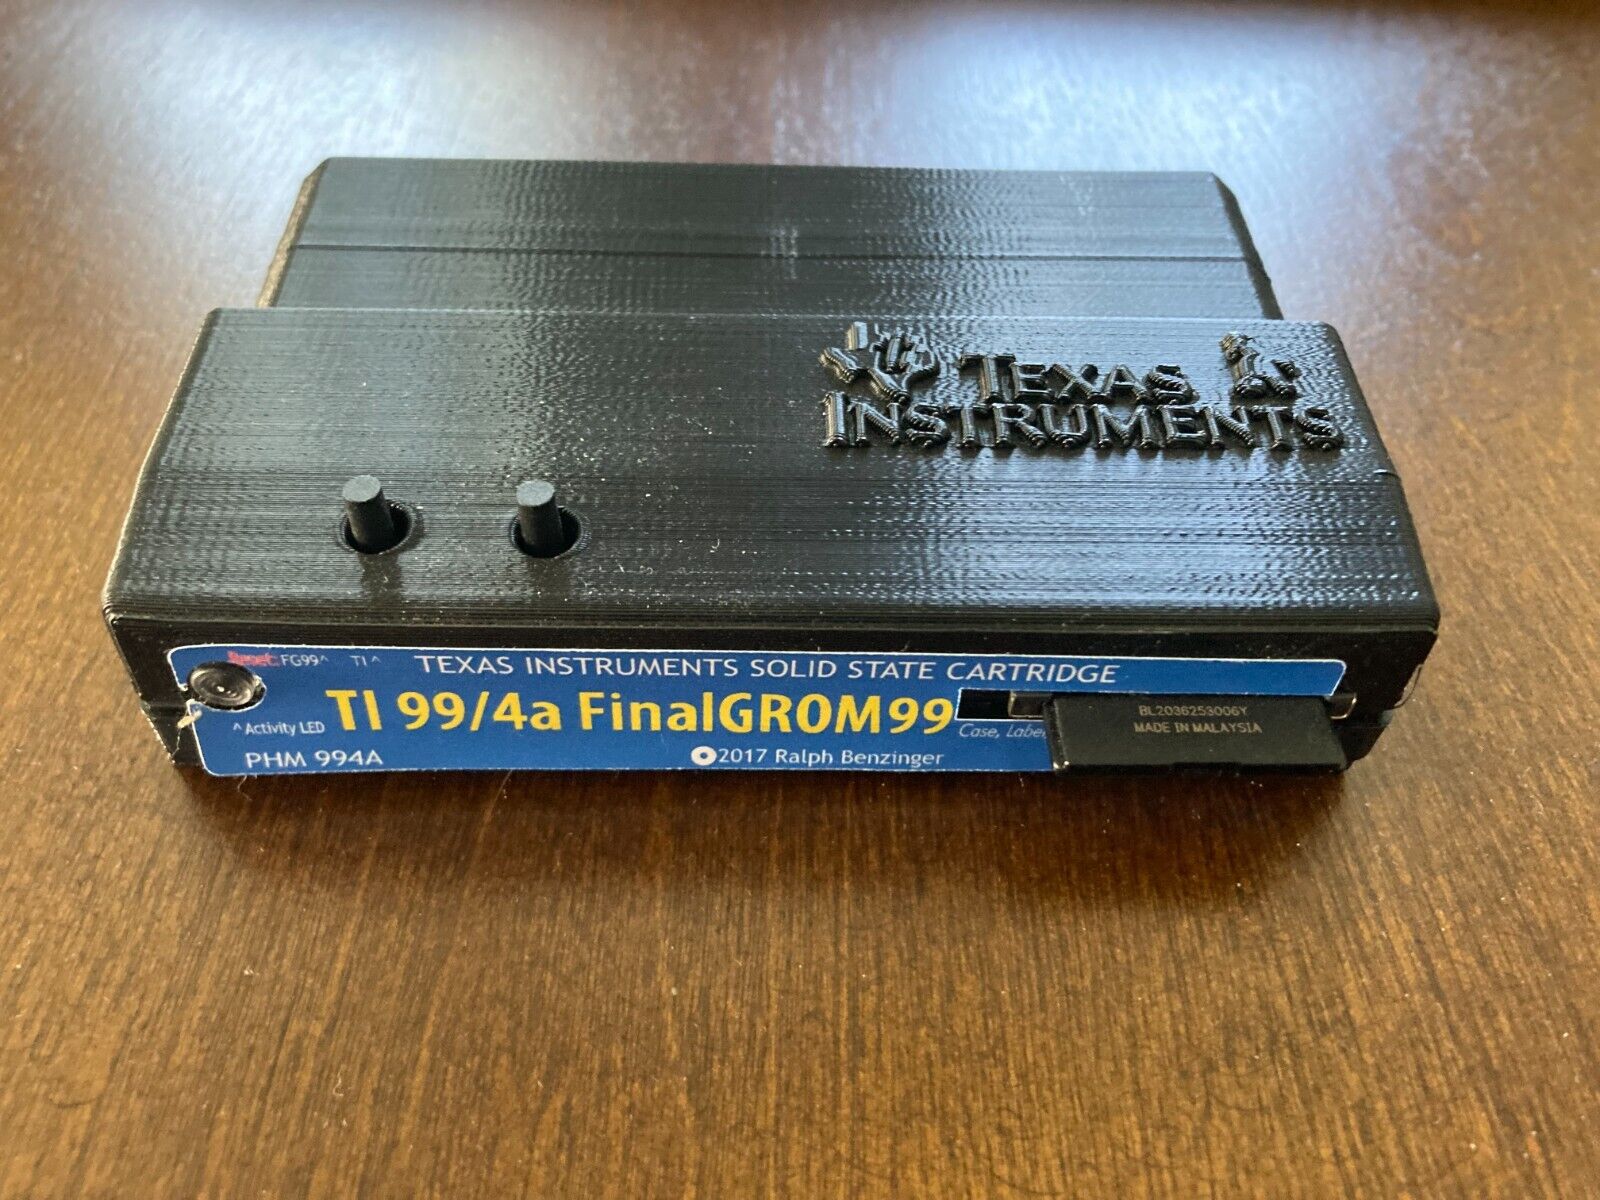 Texas Instruments TI-99/4A FinalGROM99 for the Texas Instruments 99/4a